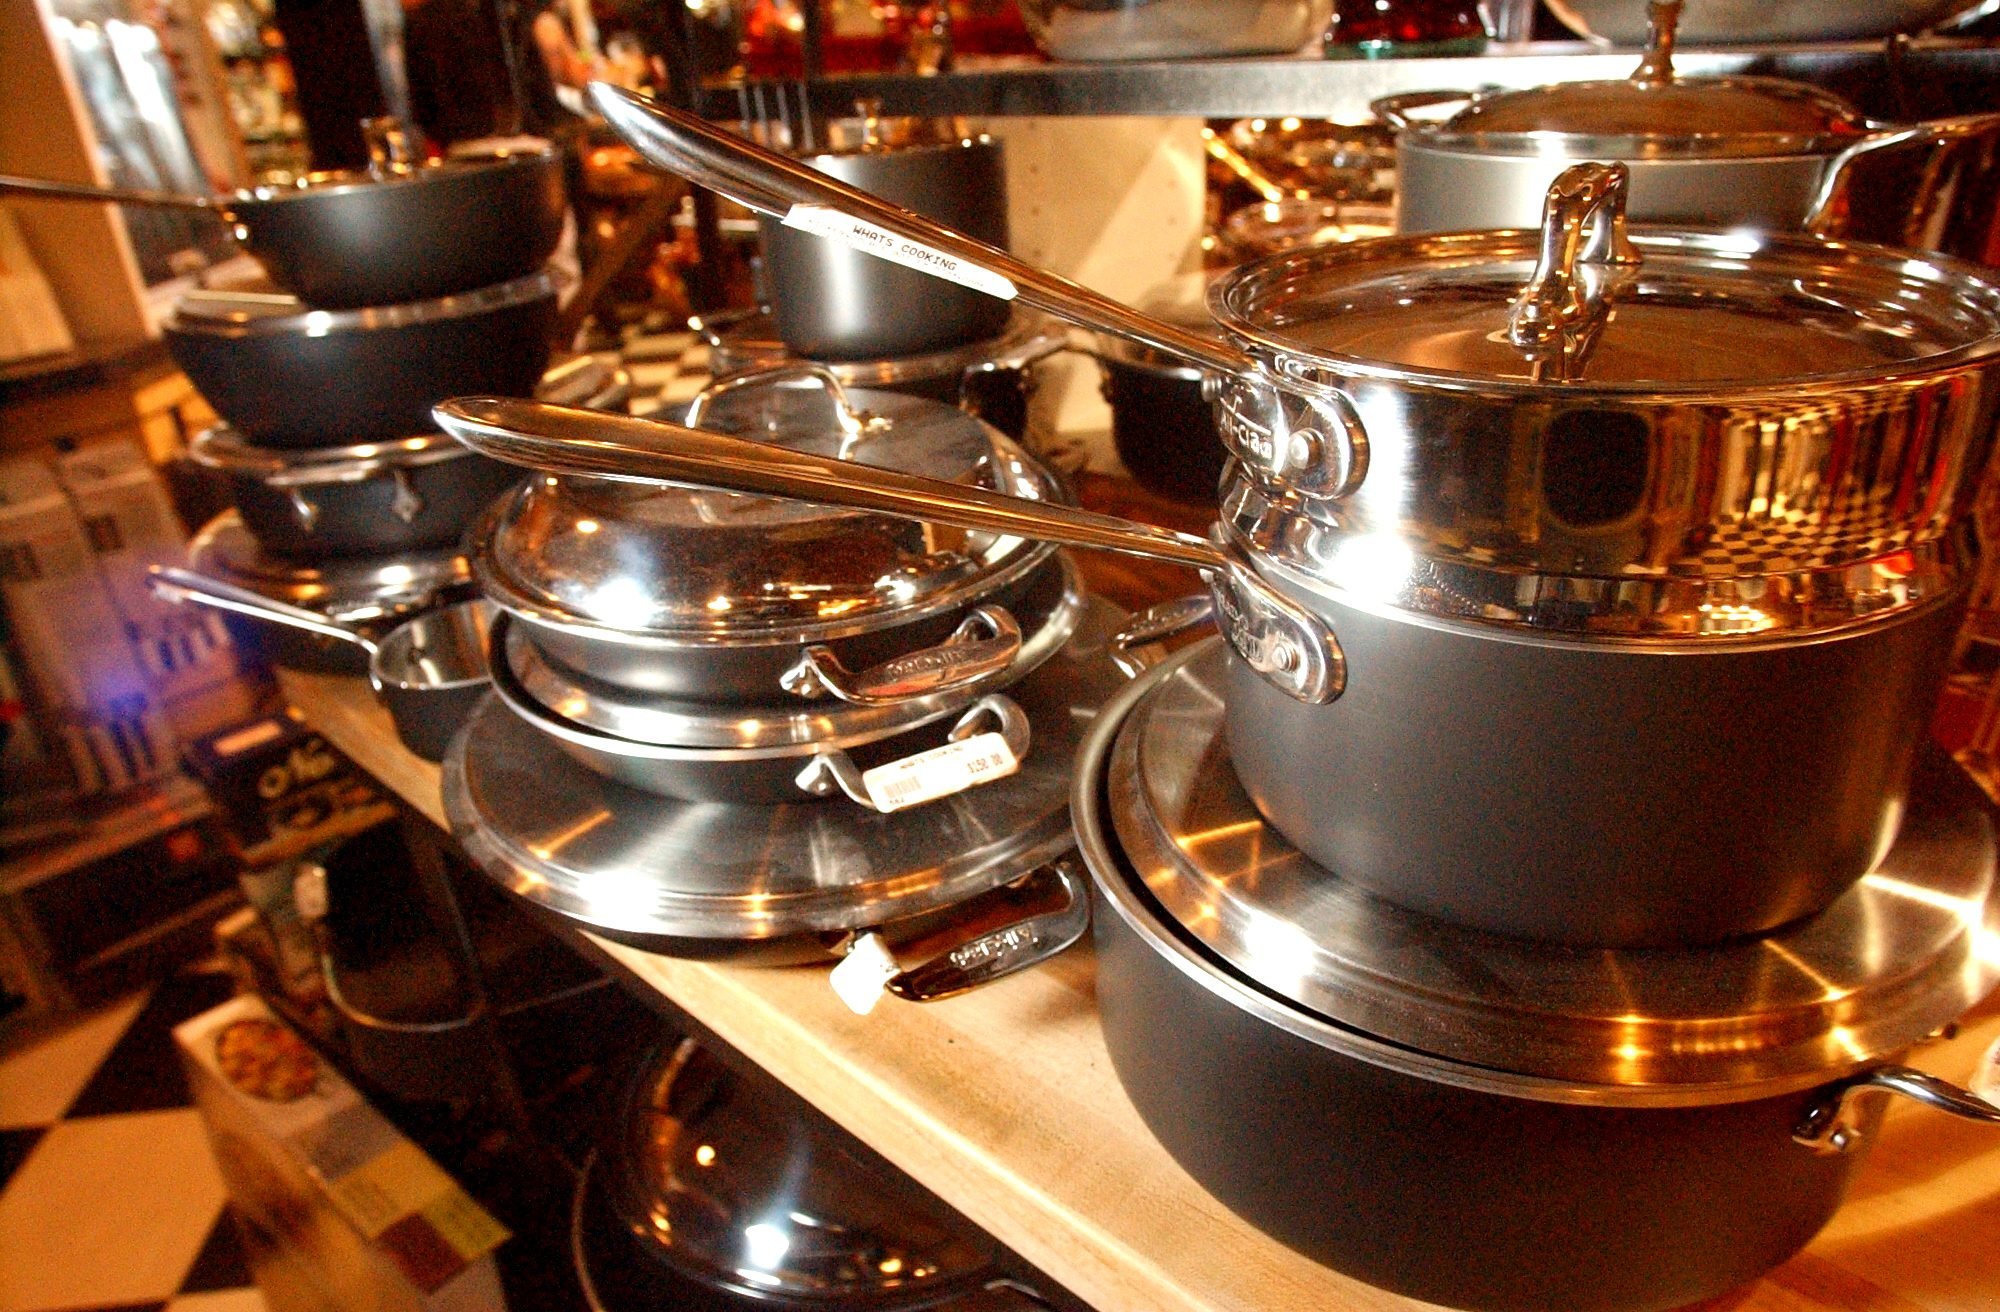 All-Clad sale: Get high-end cookware at a seriously low price right now